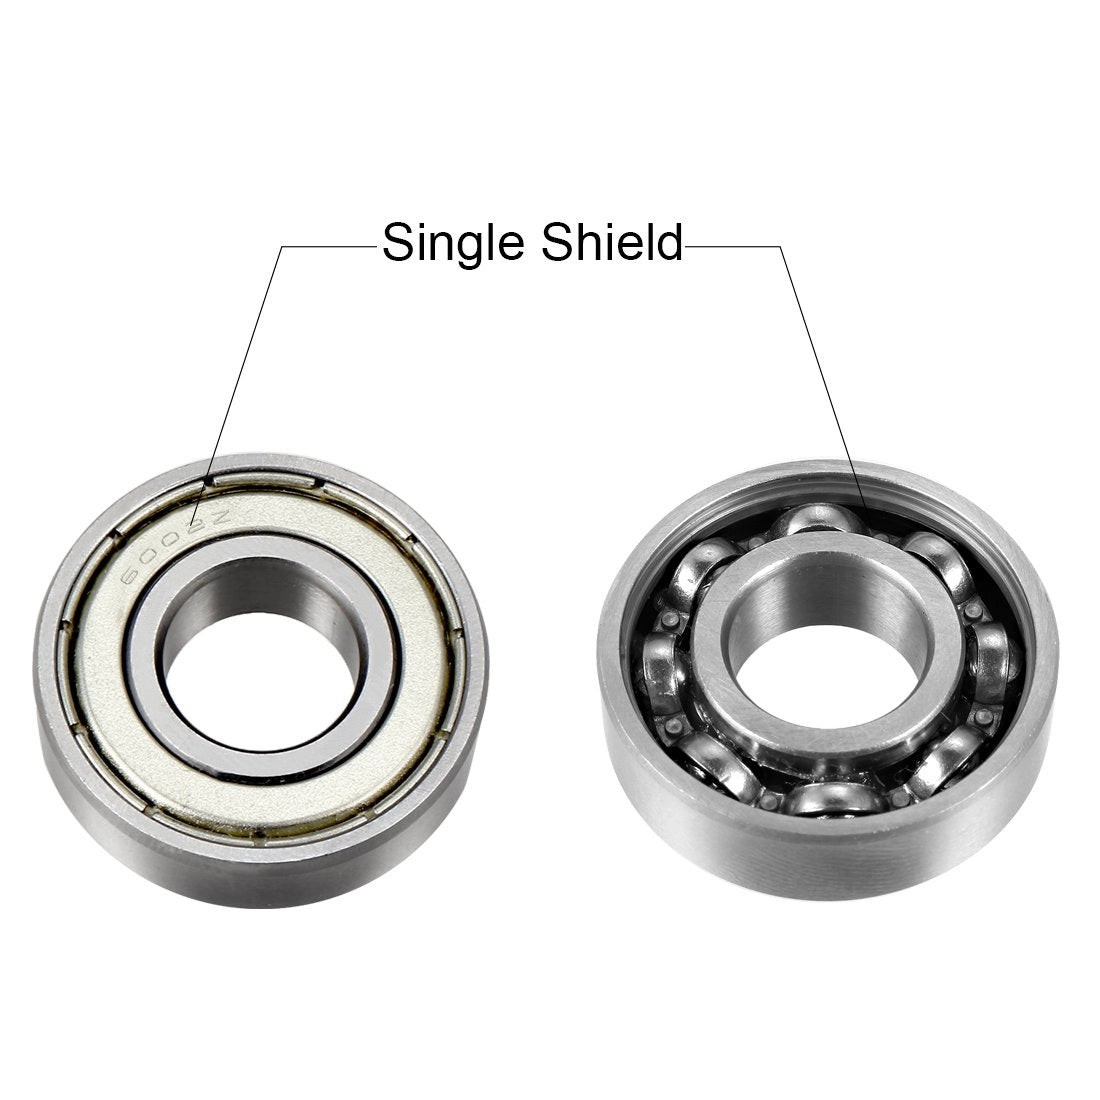 uxcell 6002Z Deep Groove Ball Bearing Single Shield 160102, 15mm x 32mm x 9mm Chrome Steel Bearings (Pack of 5)-2